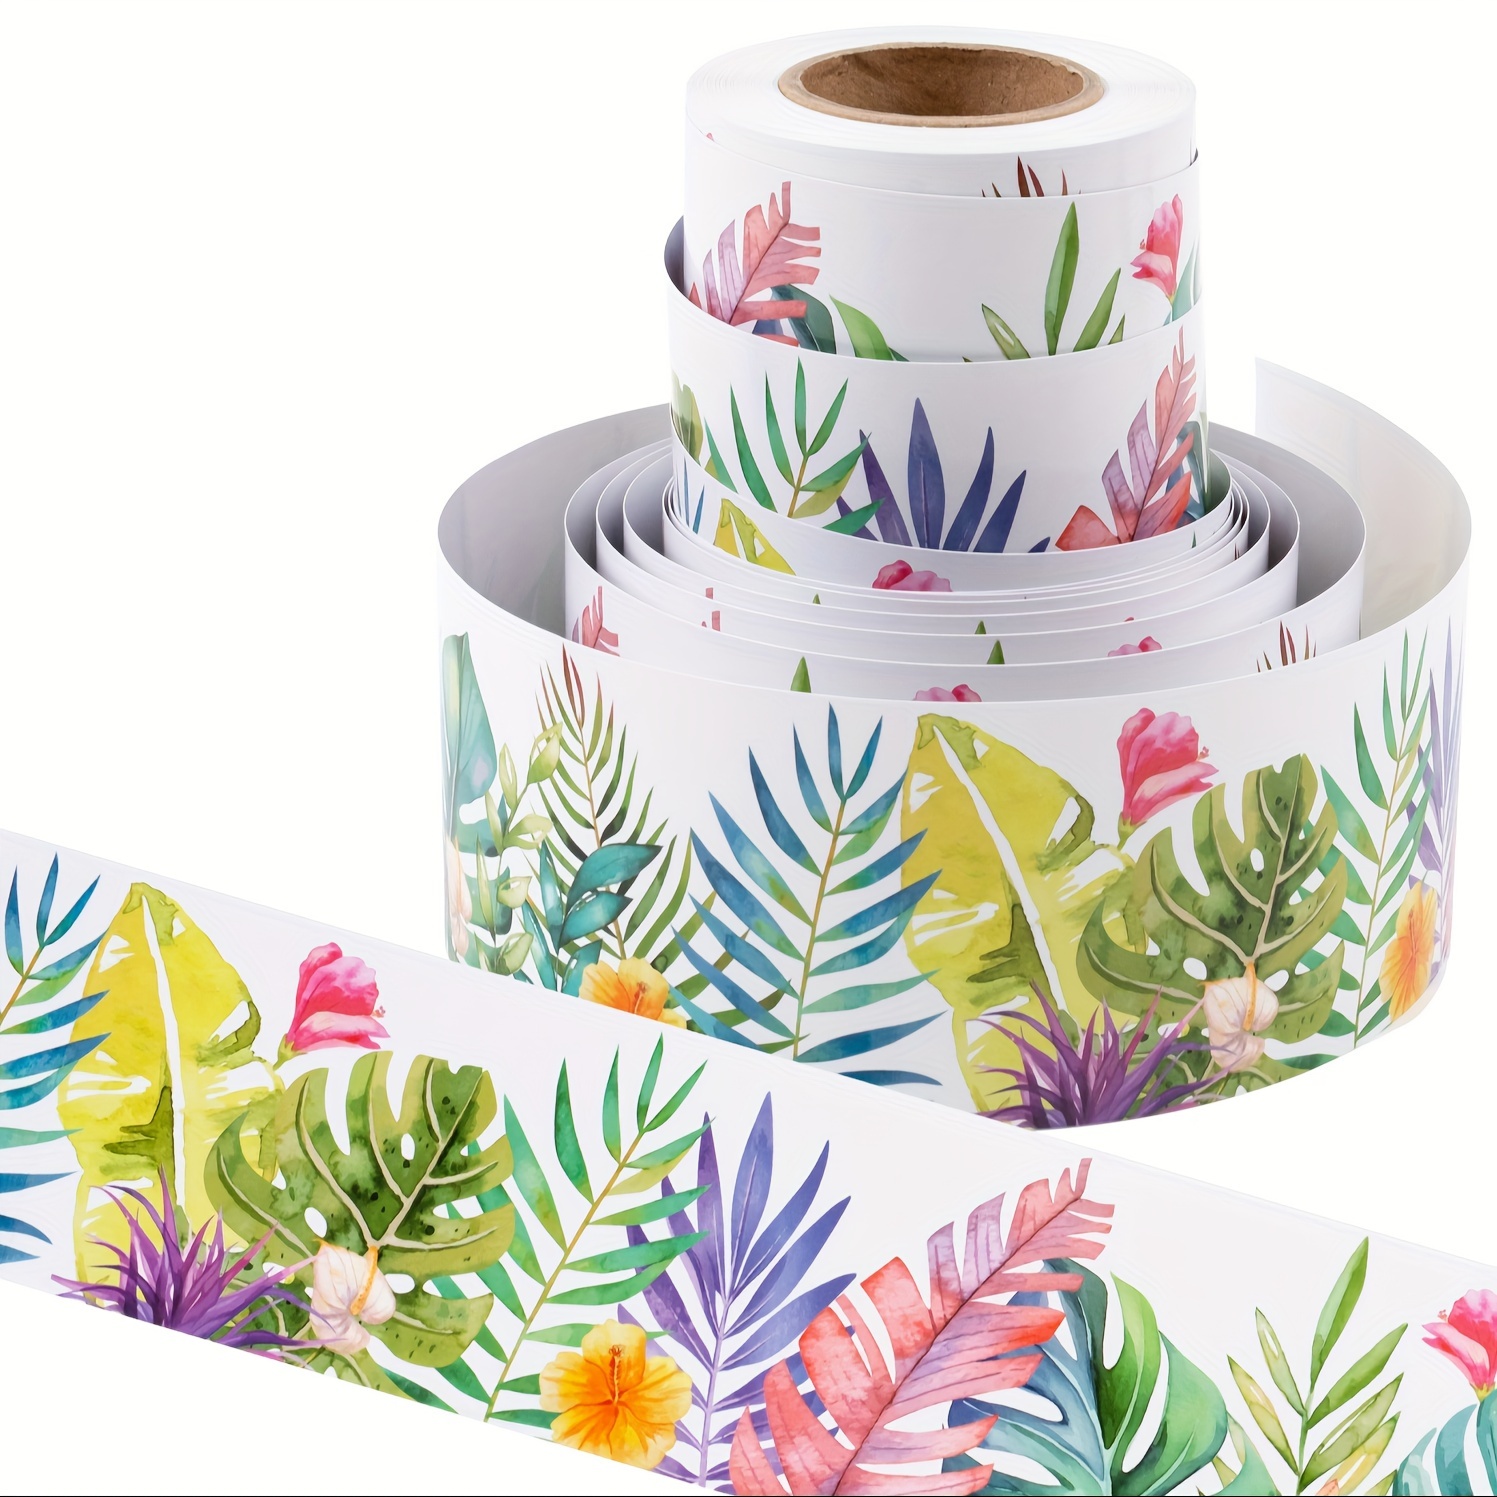 

Square-shaped Paper Bulletin Board Border With Tropical Leaves Design, Double-sided 49ft Roll For Classroom Decoration And Party Supplies